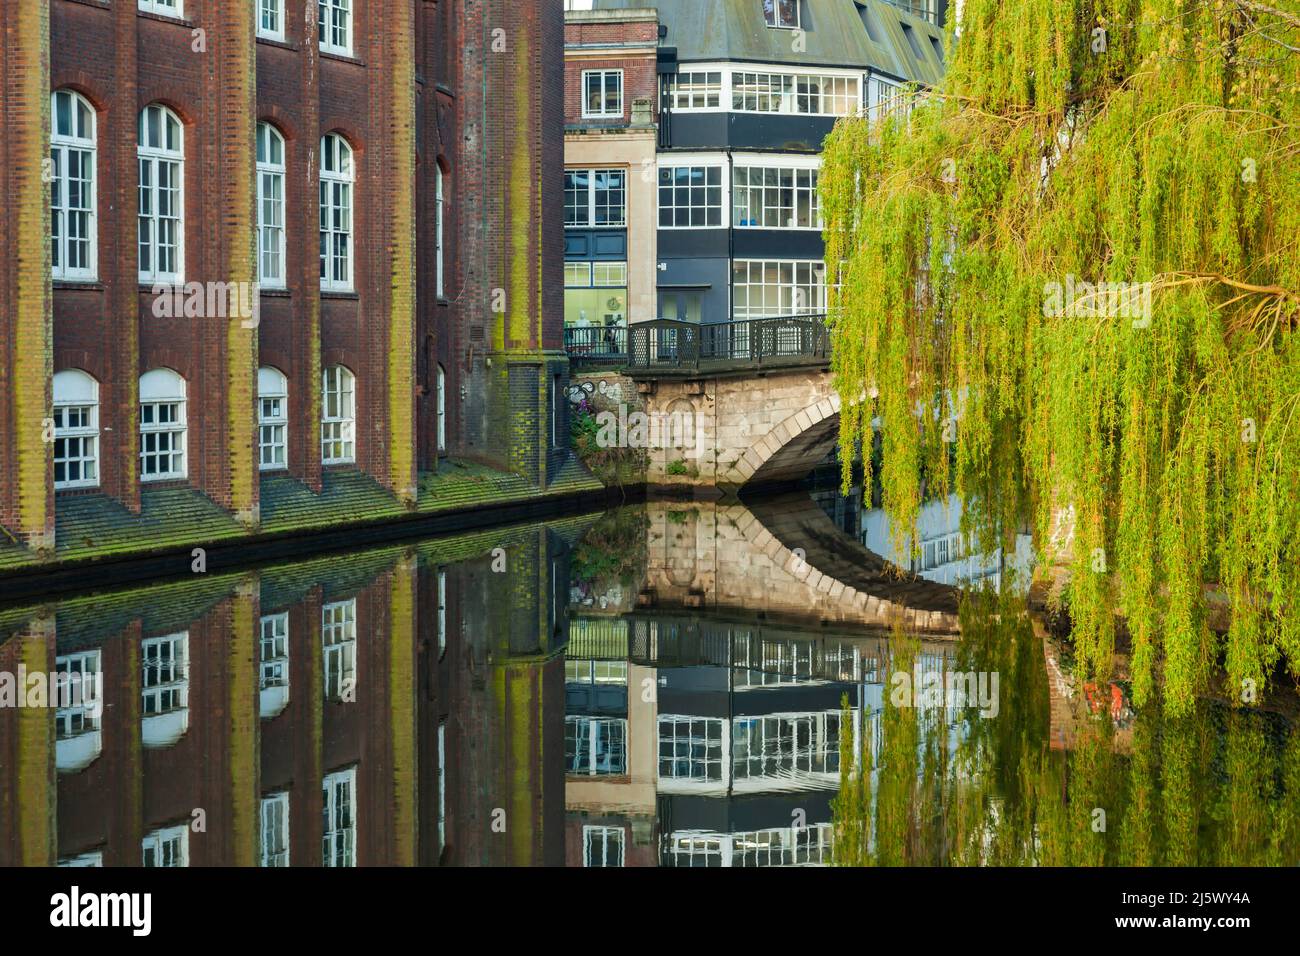 Spring morning on river Wensum in Norwich, Norfolk, England. Stock Photo